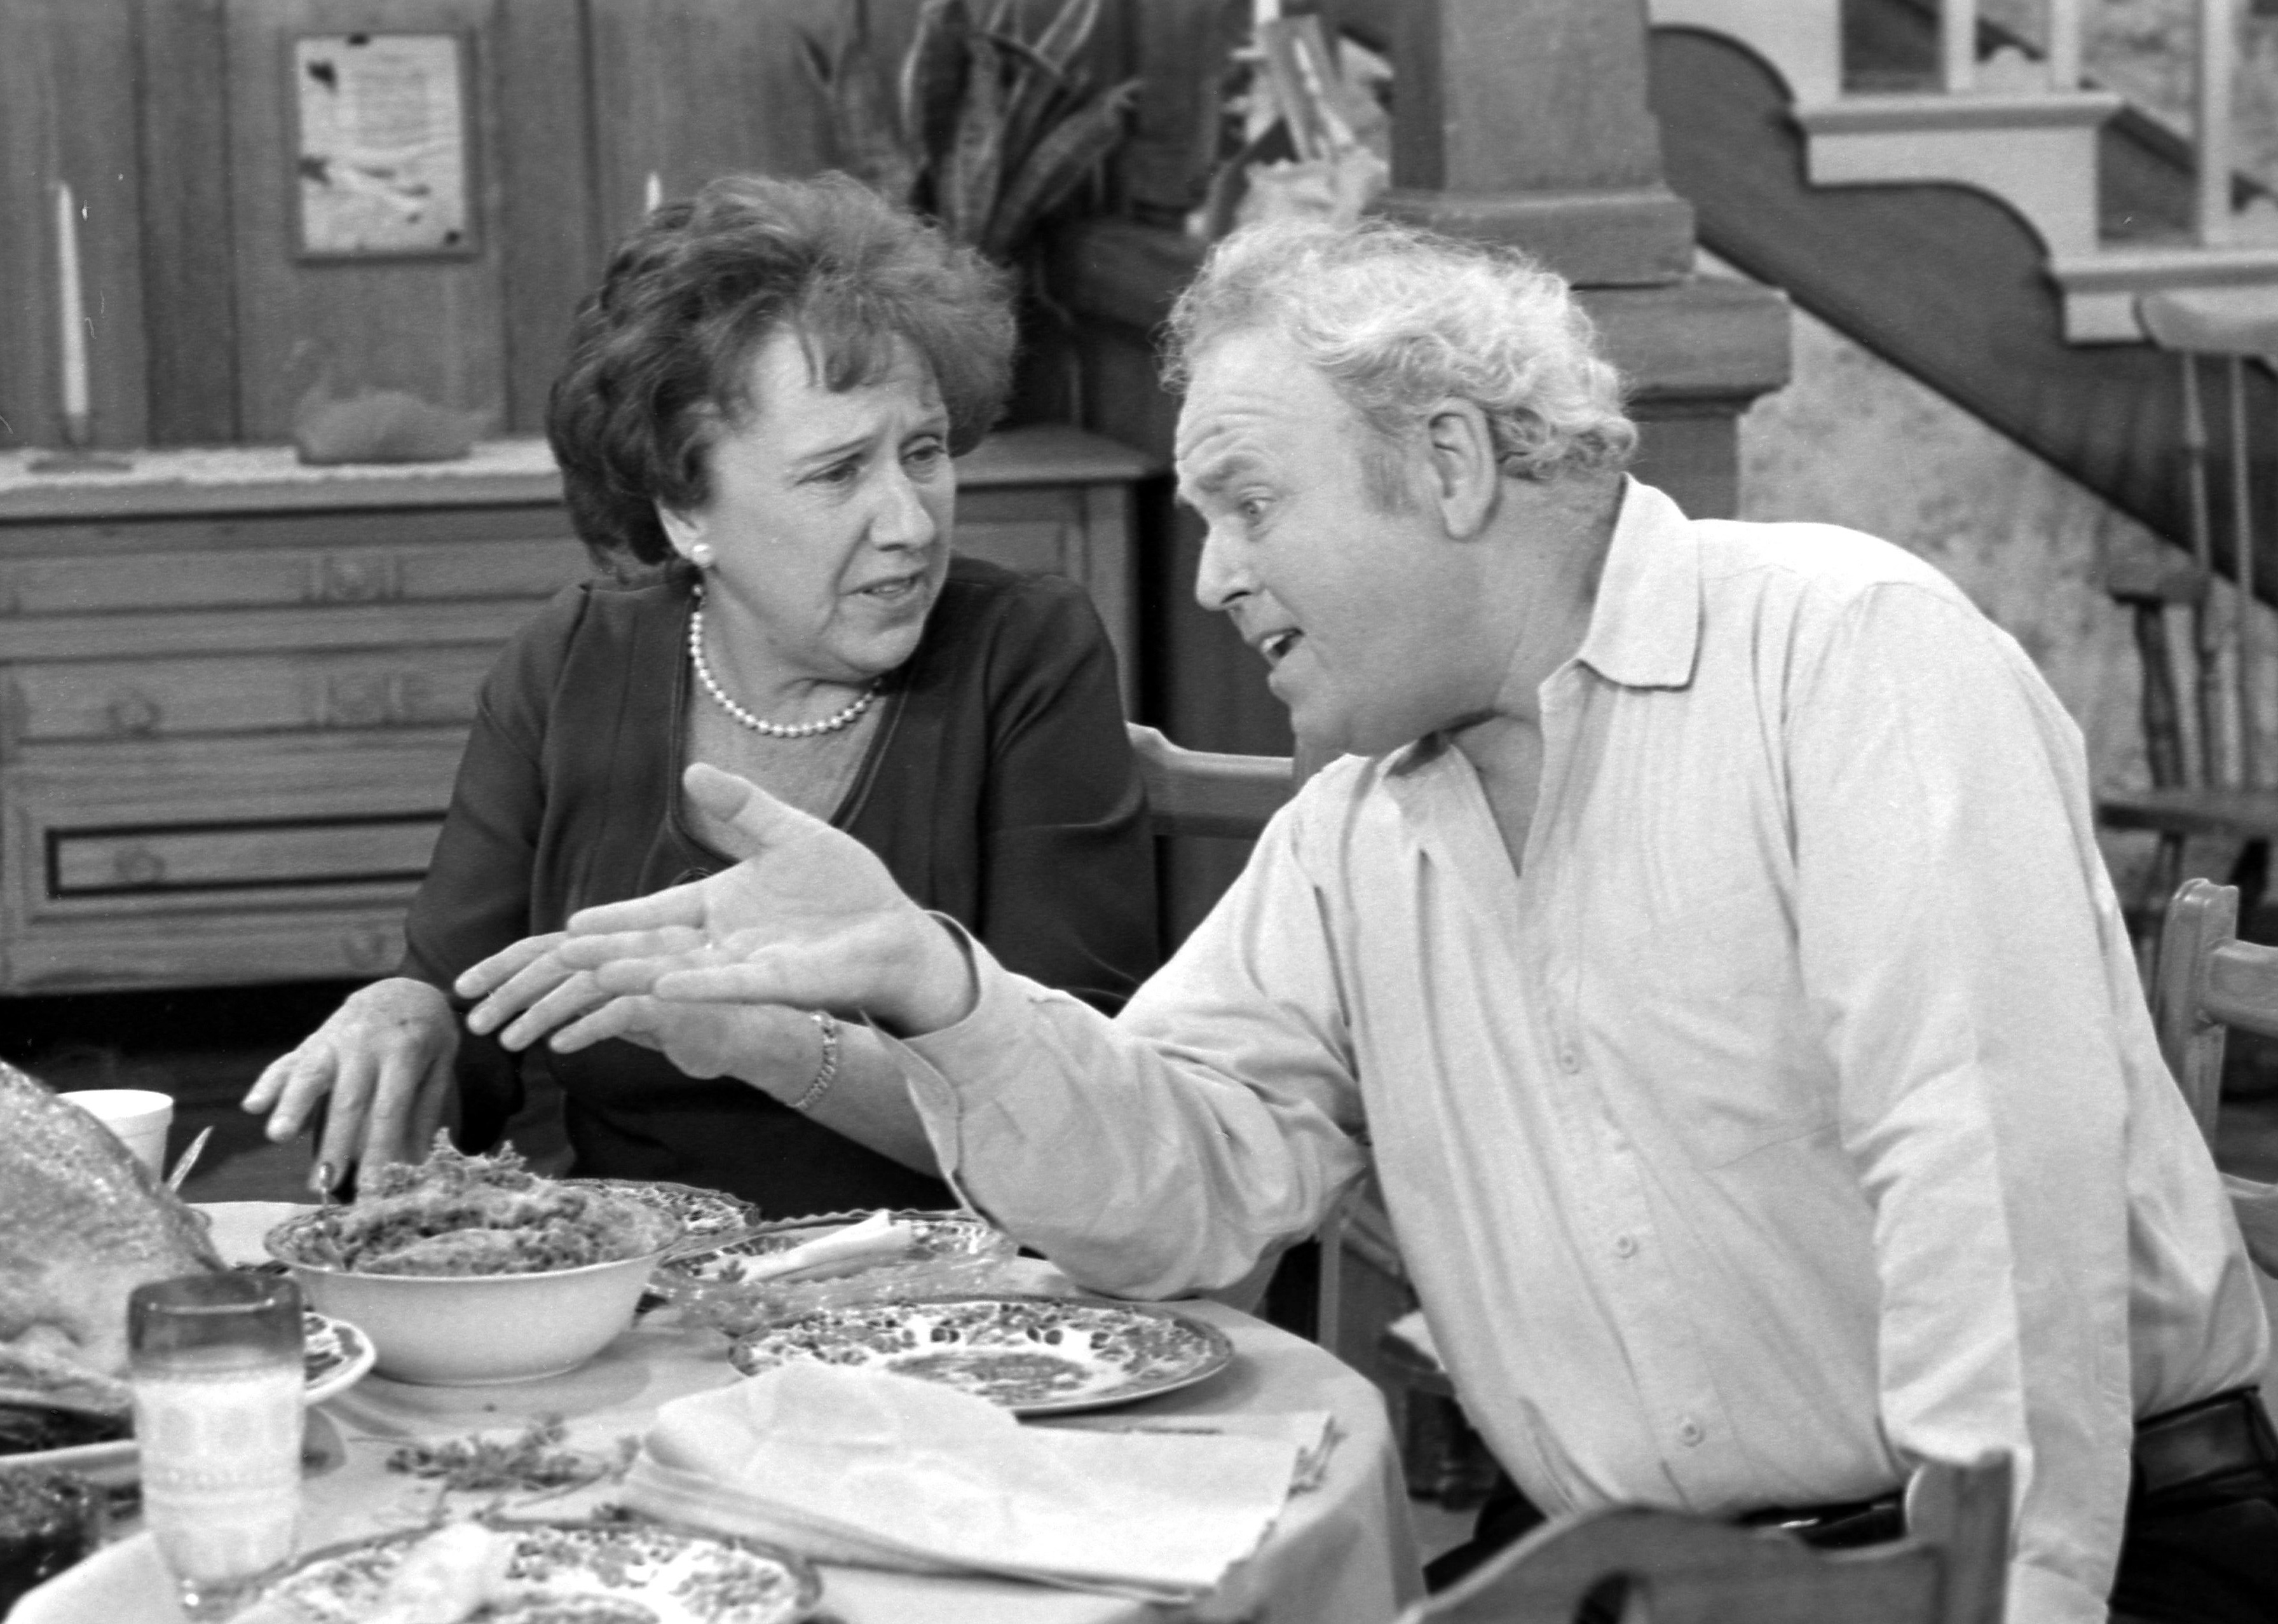 Carroll O'Connor and Jean Stapleton talking at the dinner table on the set of All in the Family.